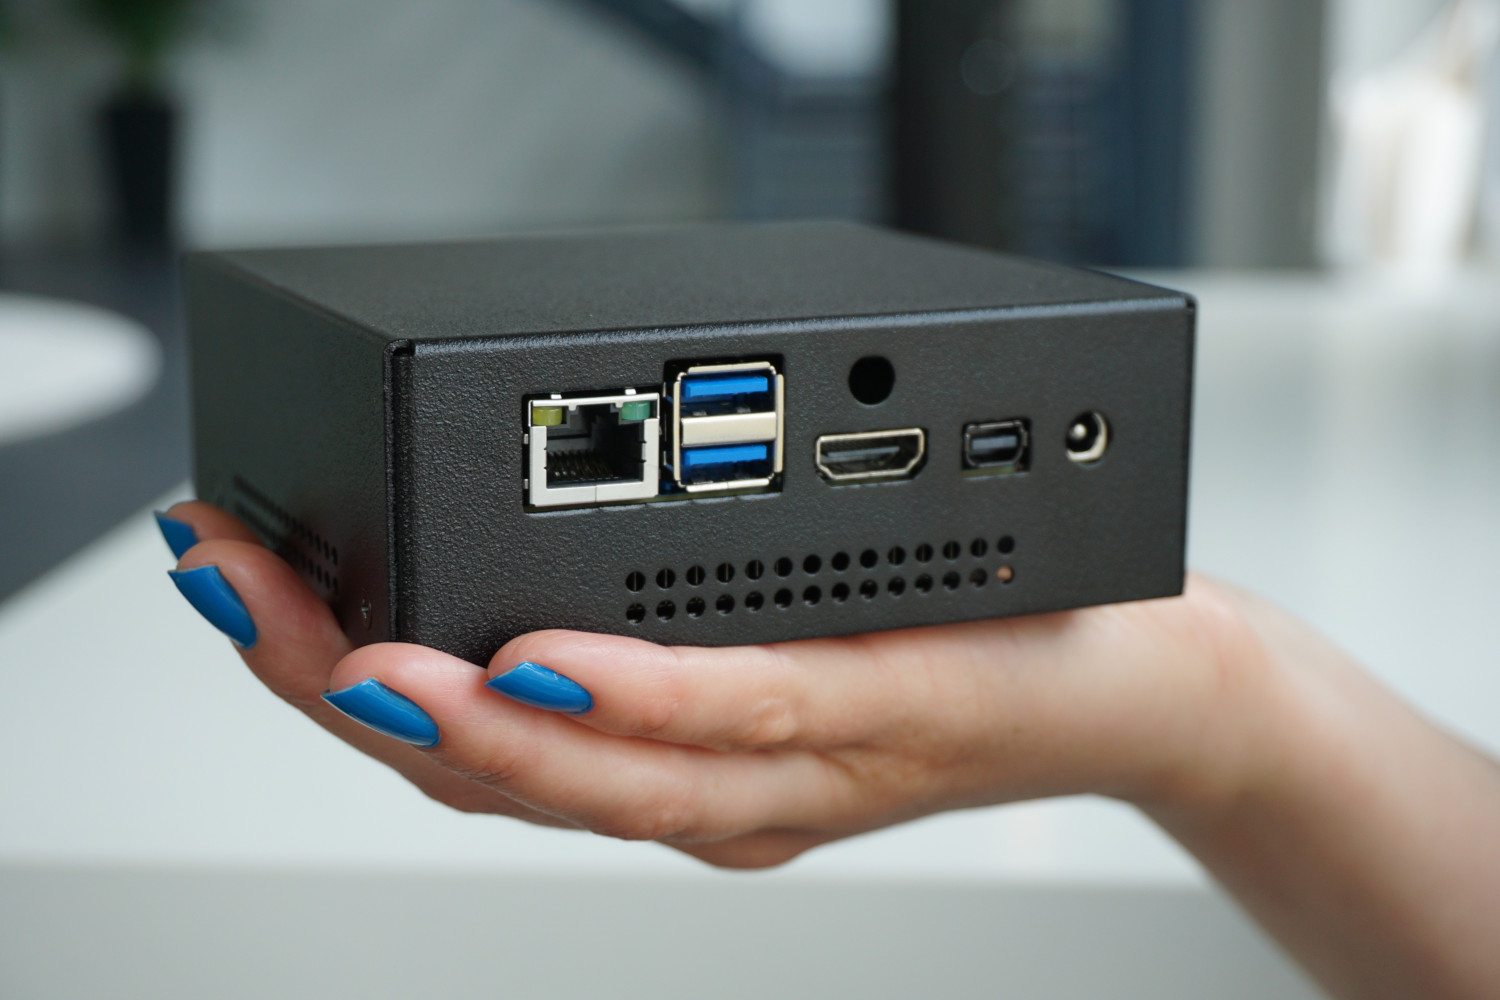 Mini-PC product series from spo-comm – digital signage players 